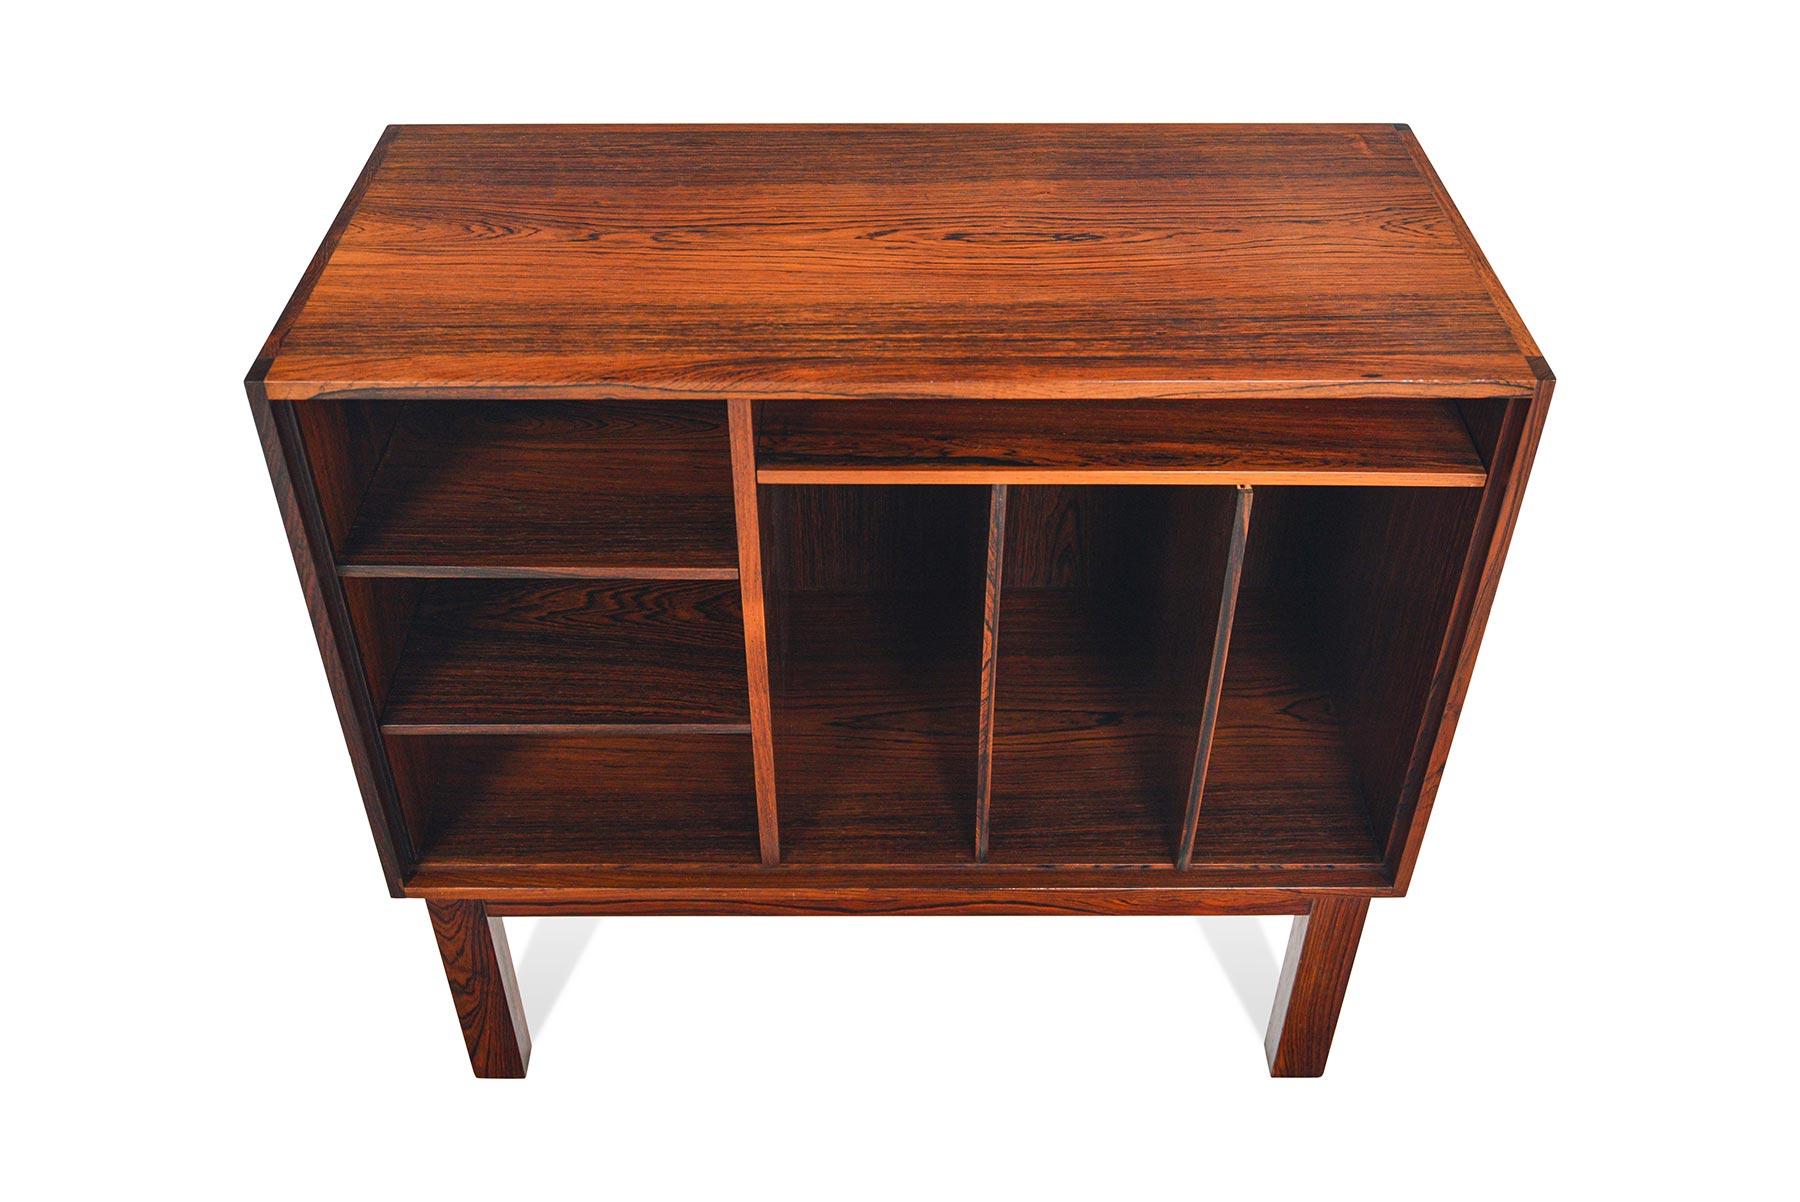 This Danish modern small Brazilian rosewood record storage cabinet is a sought after by midcentury collectors and audiophiles alike. Designed in the late 1960s, this fantastic piece features a large cubby with adjustable dividers- perfect for